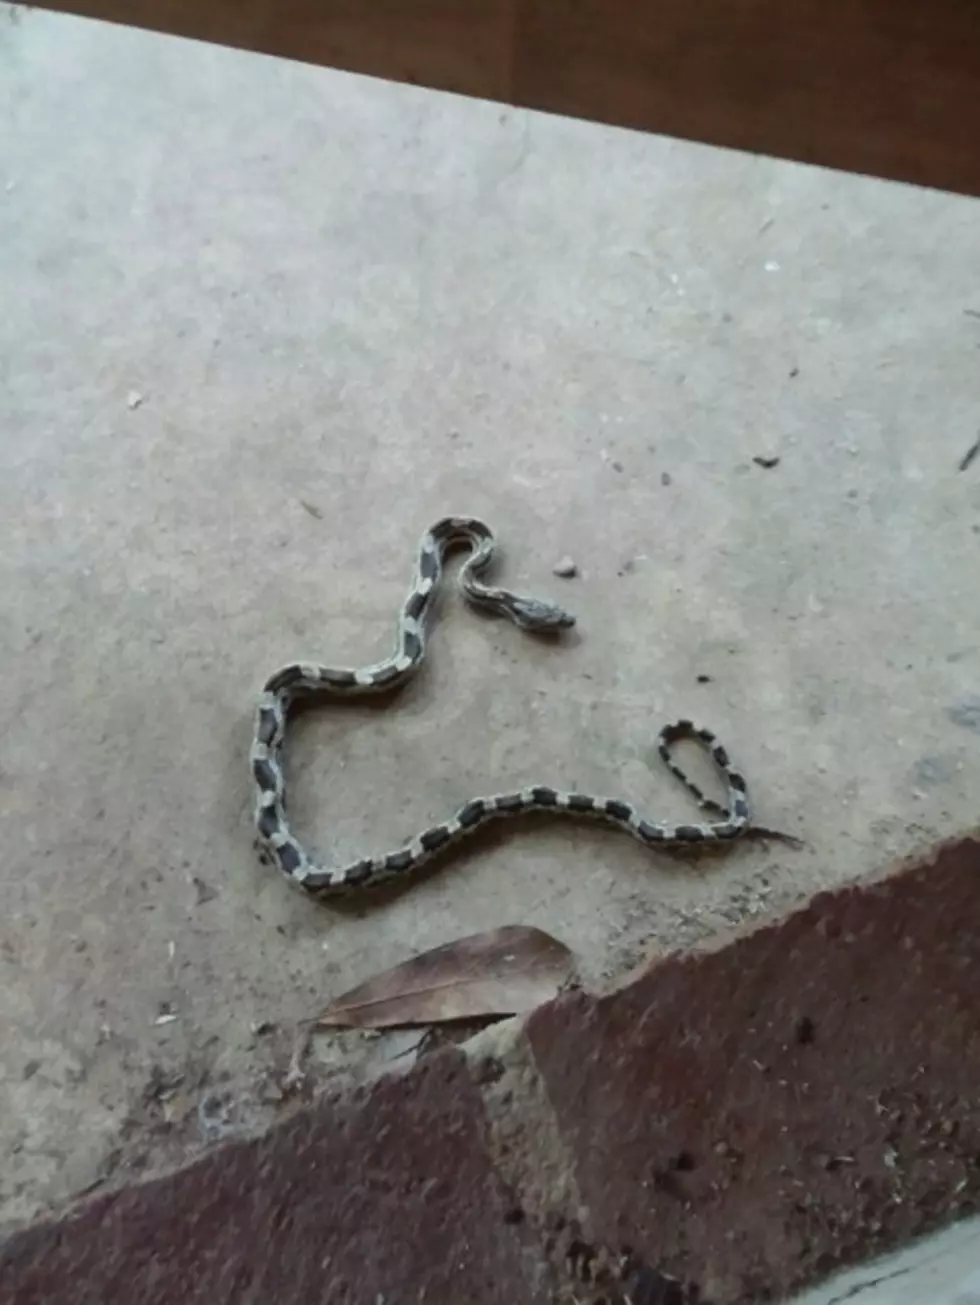 Do You Know What Kind of Snake This Is?